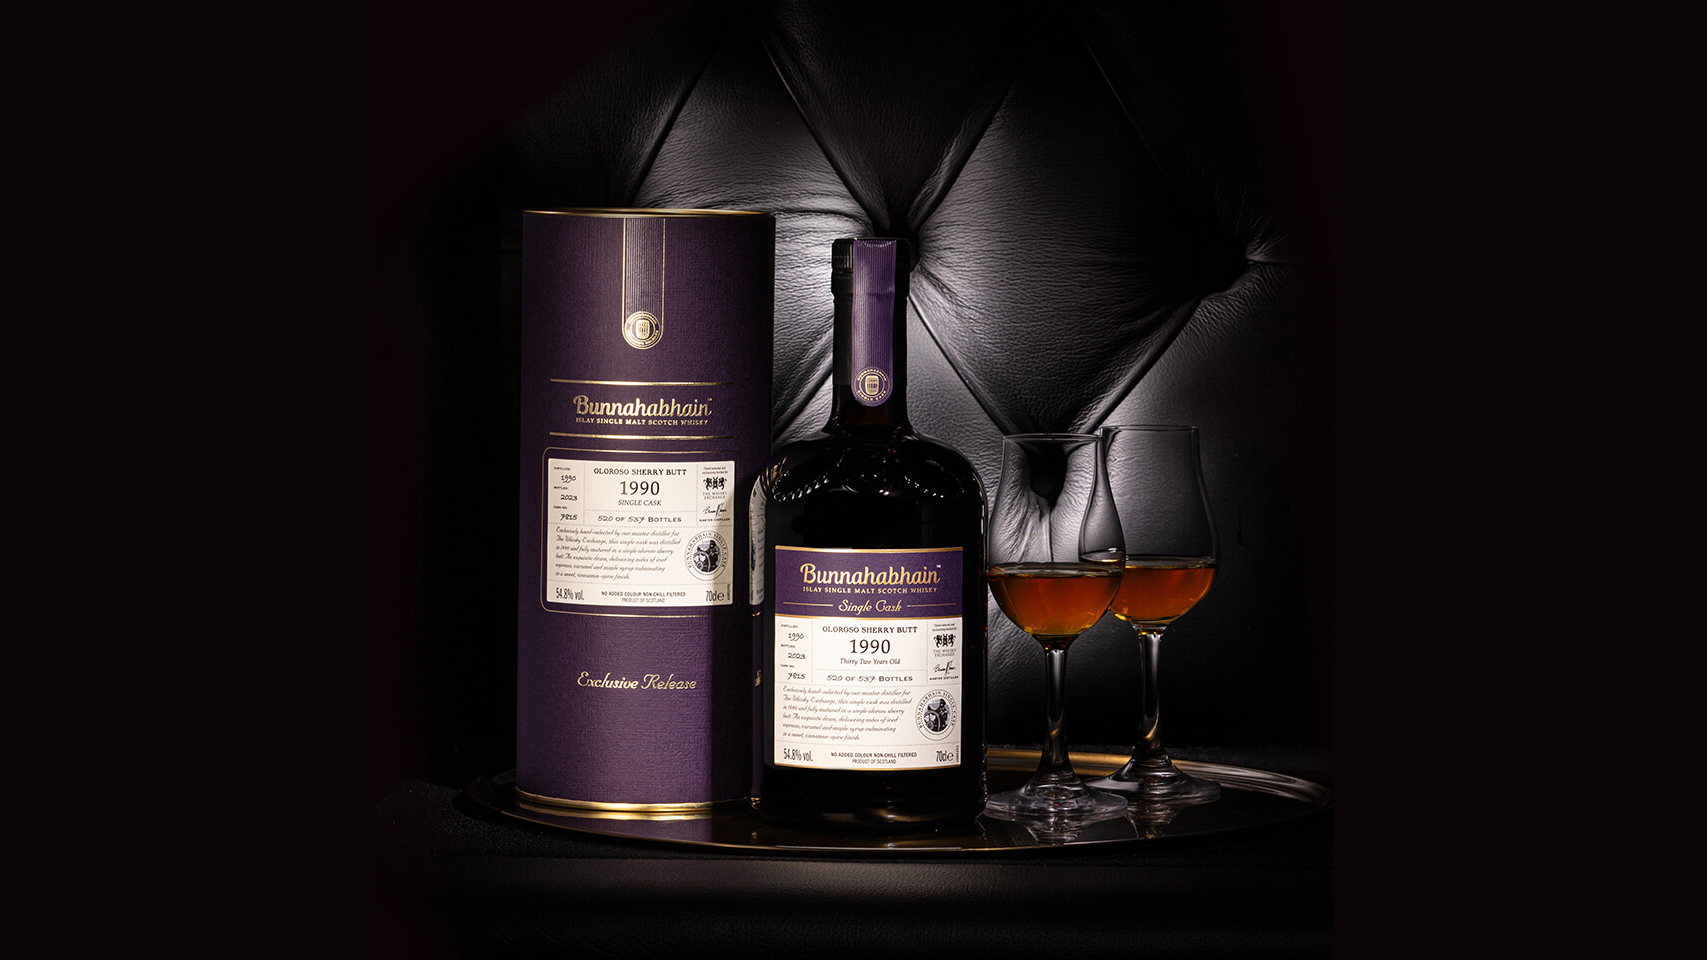 Bunnahabhain 1990 Is A 32-Year-Old Whisky Matured Exclusively In A Single Oloroso